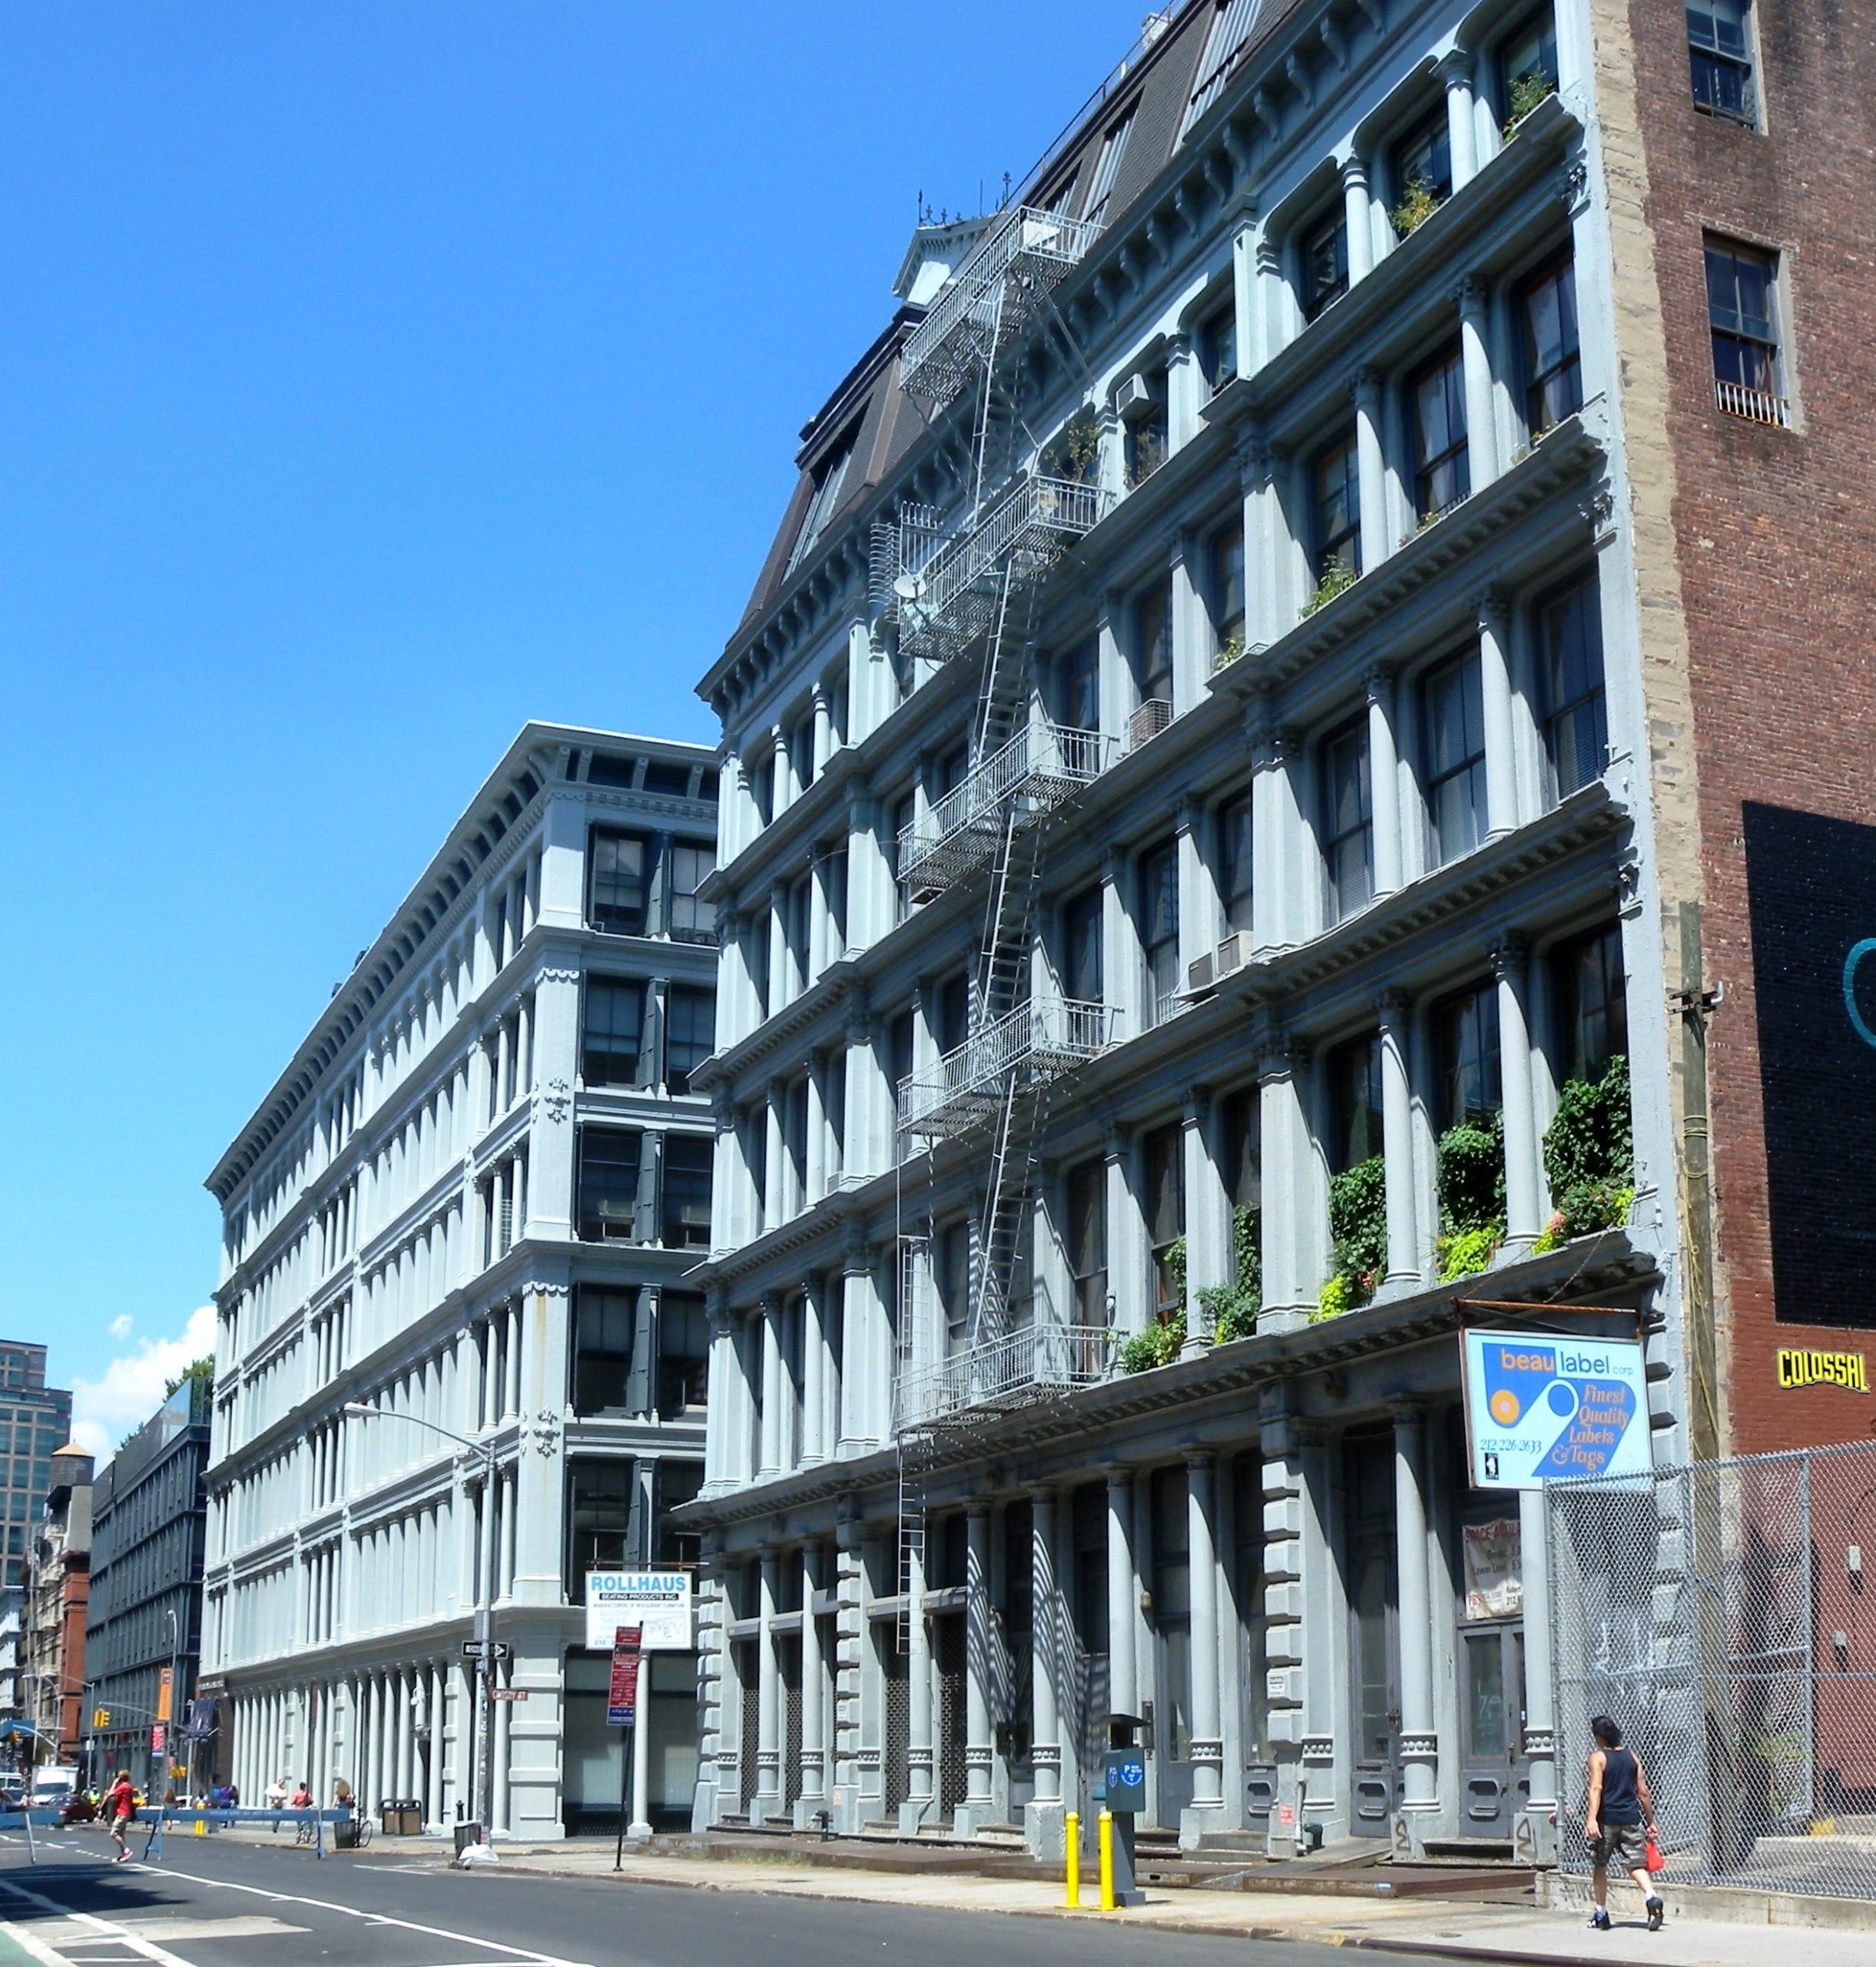 Cast-iron buildings on Grand Street between Lafayette Street and Broadway